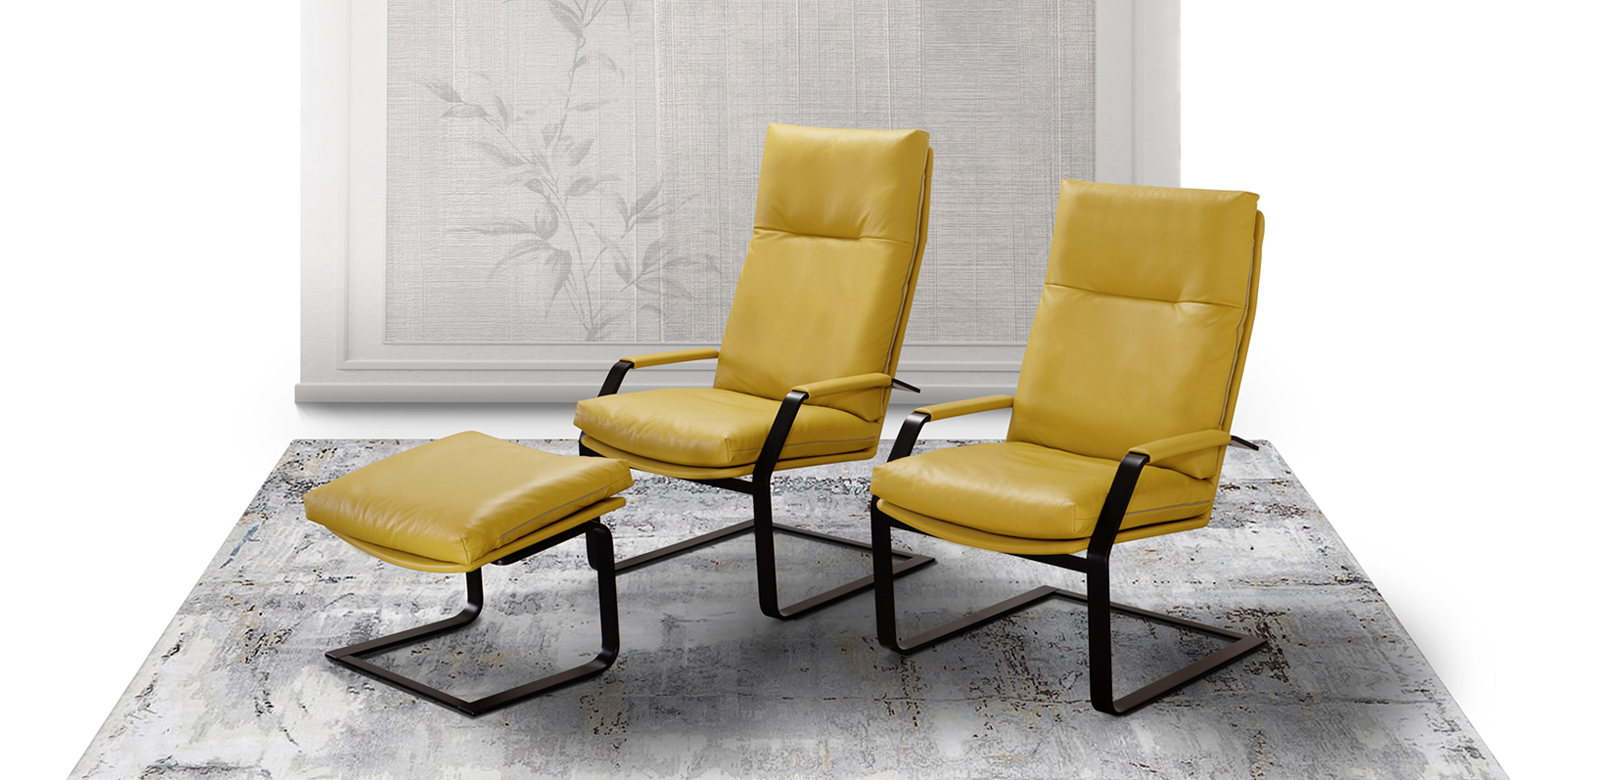 CL262/263 cantilever armchair in dark yellow leather with matching stool on grey carpet